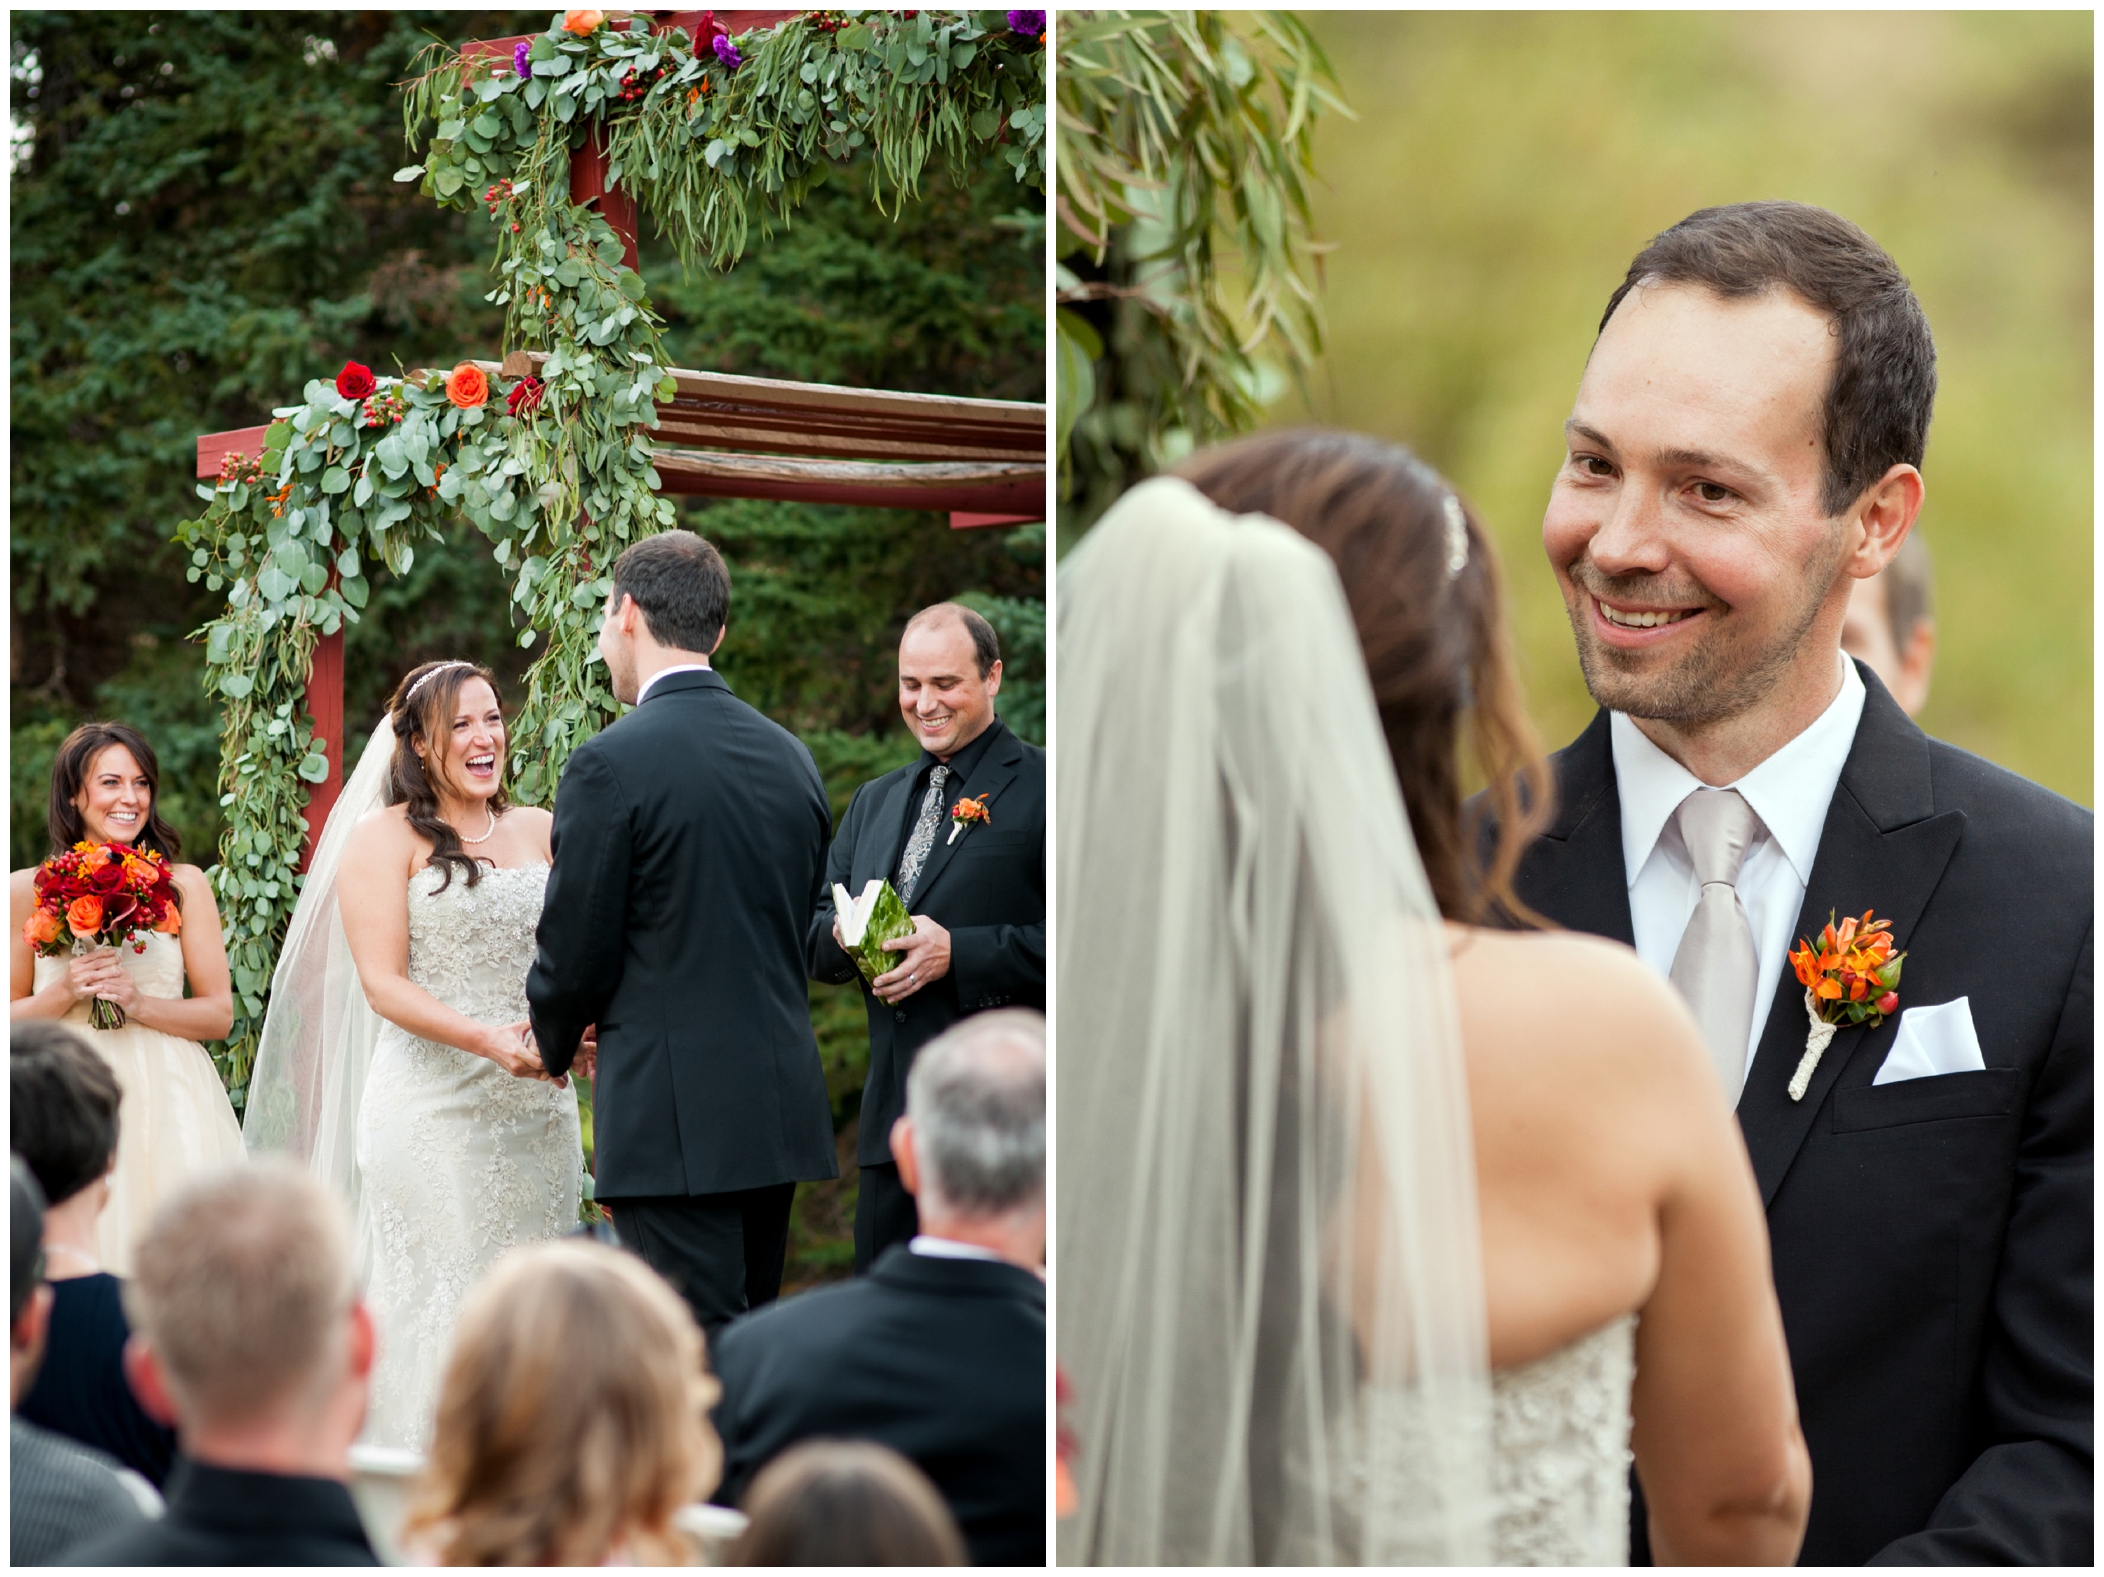 Lower Lake Ranch wedding photos by Plum Pretty Photography